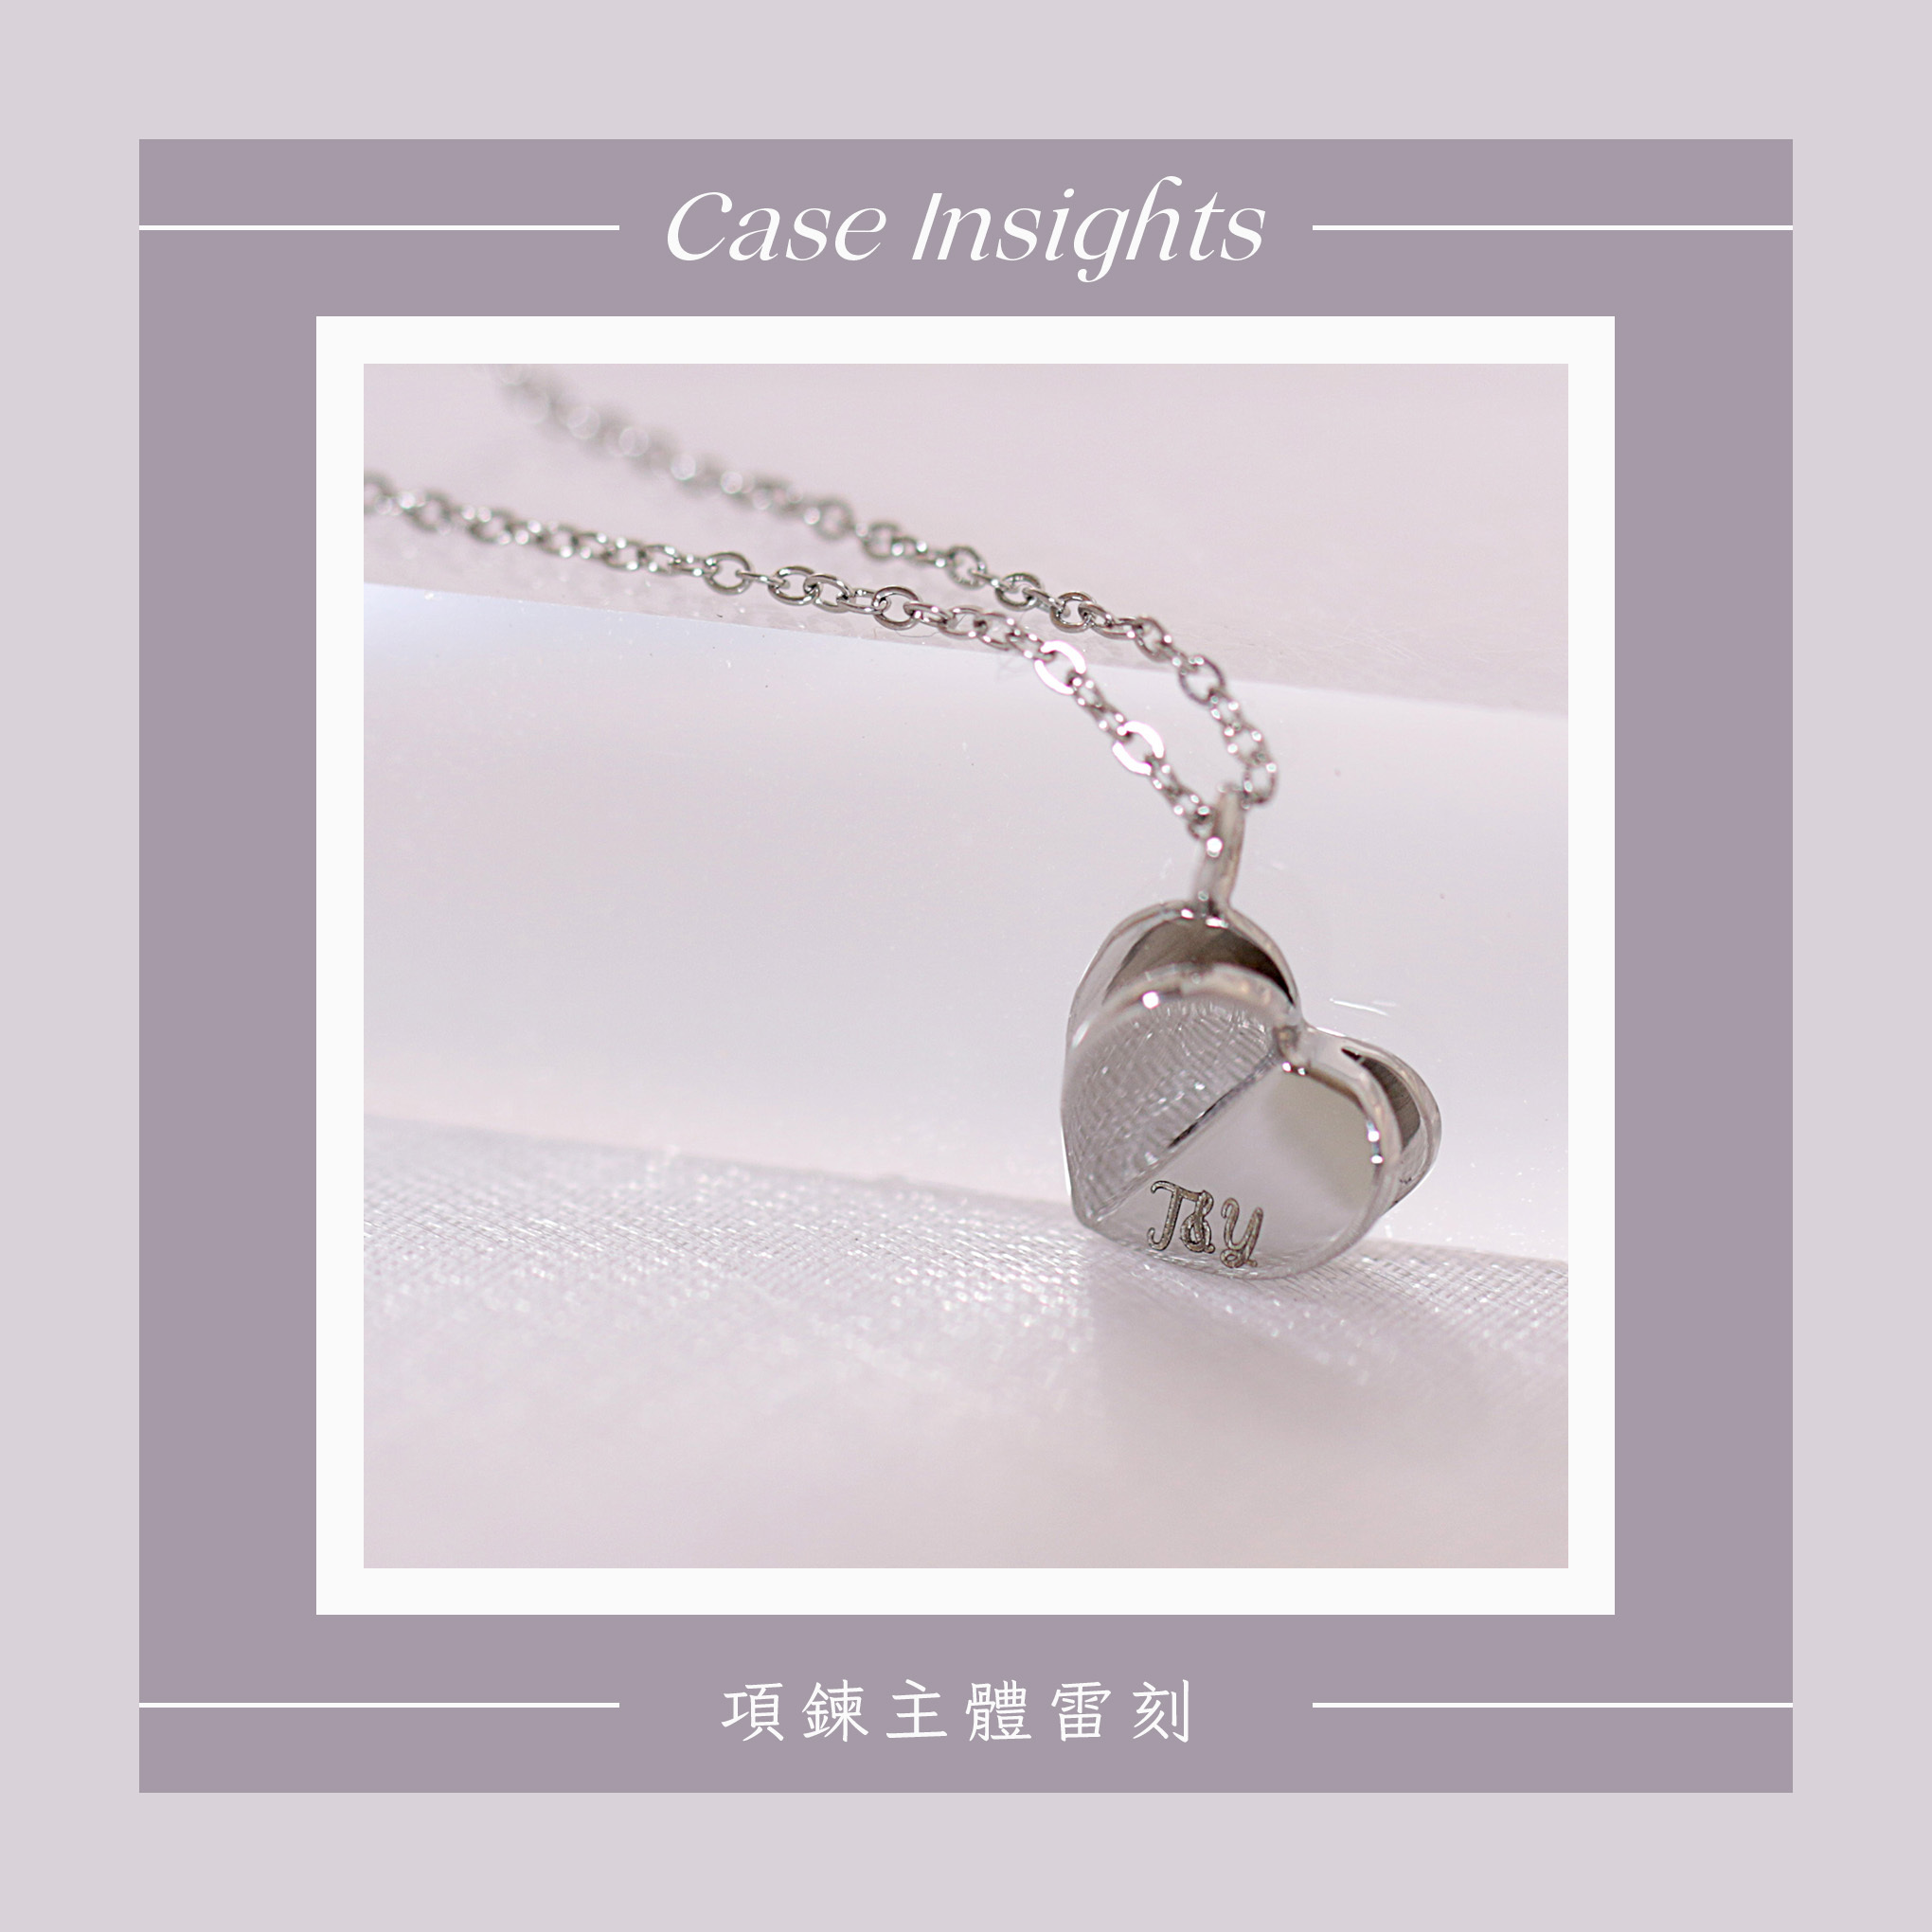 Case insights 04